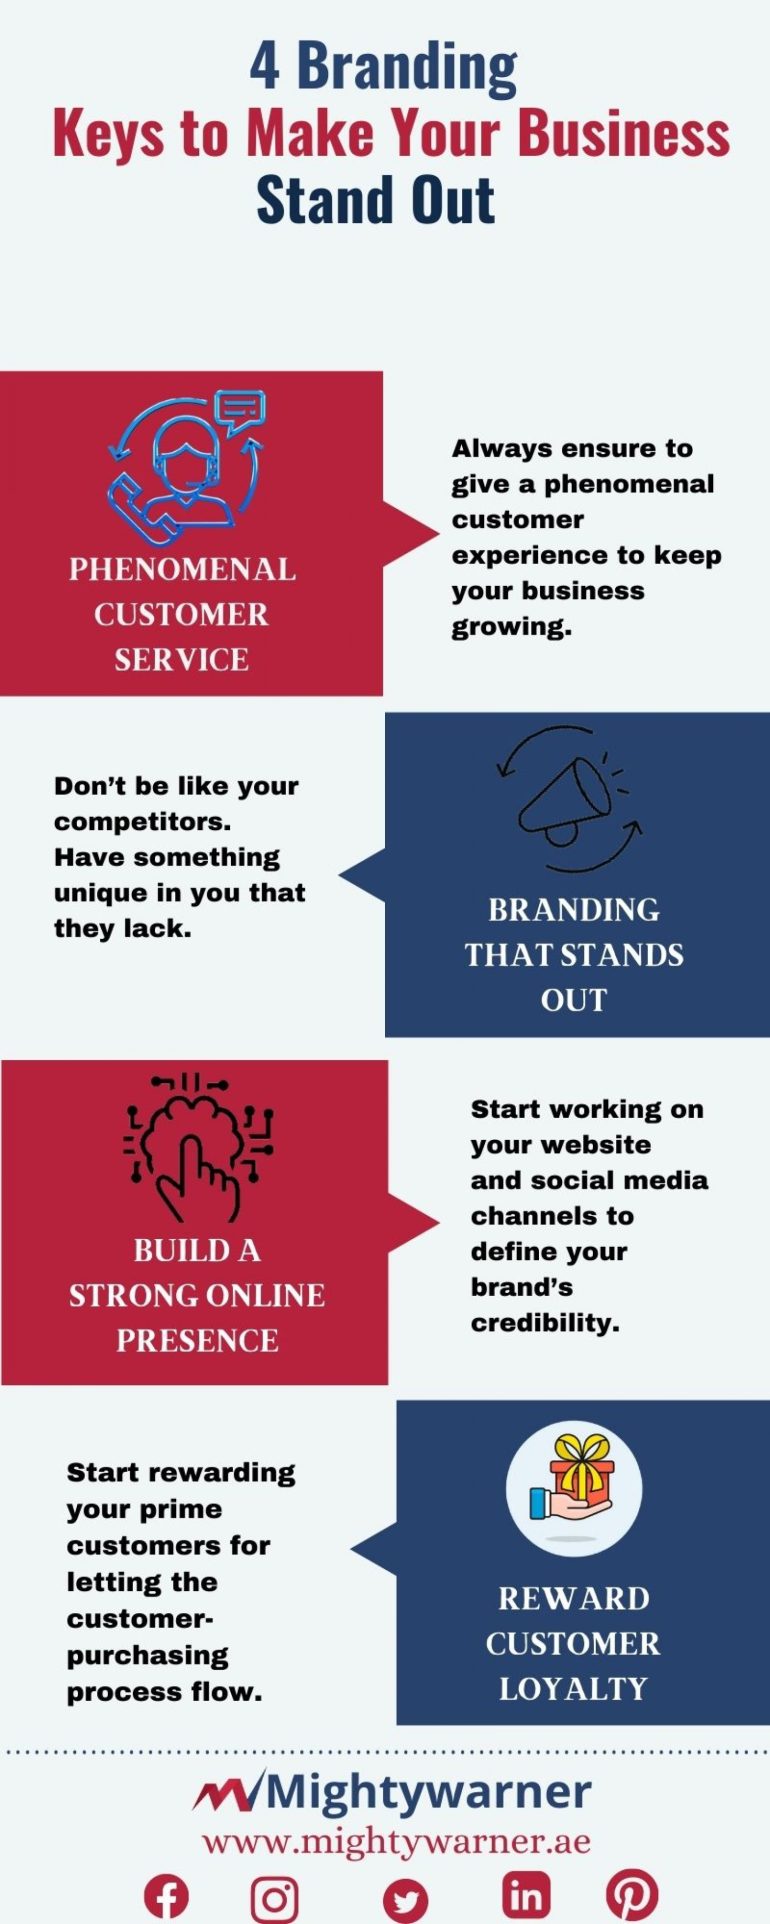 4 Branding Keys to Make Your Business Stand Out